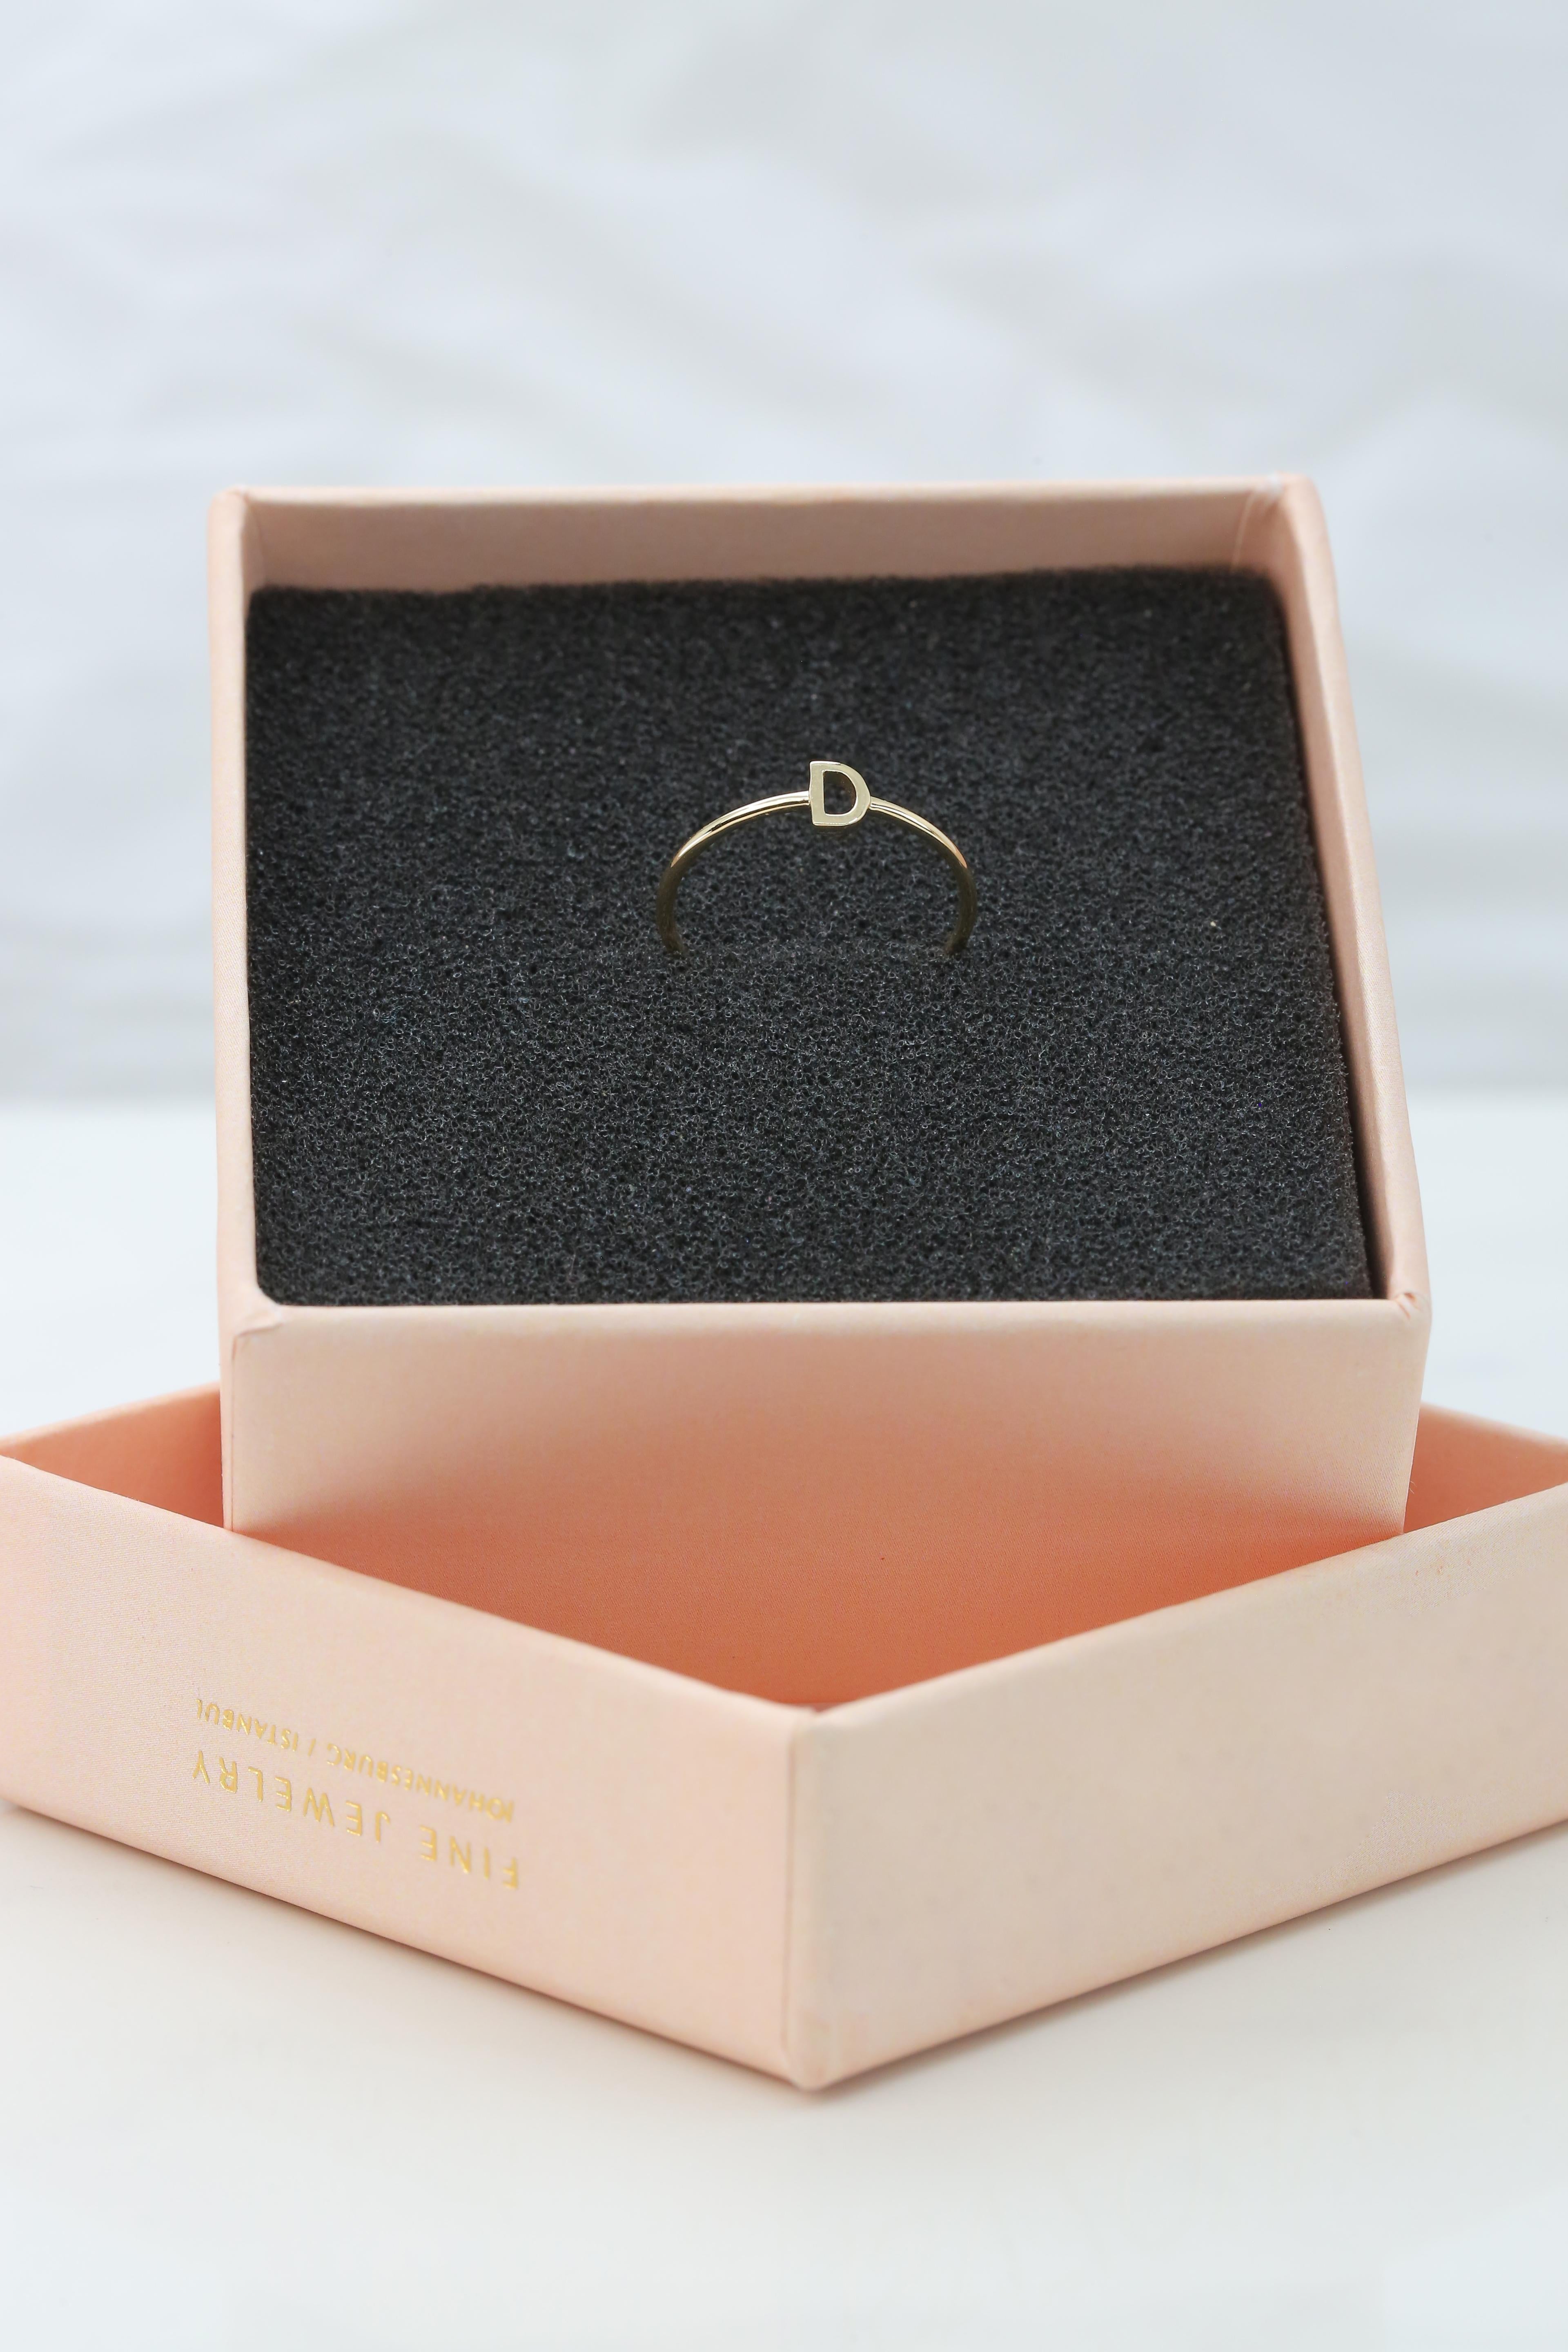 For Sale:  14K Gold Initial D Letter Ring, Personalized Initial Letter Ring 3